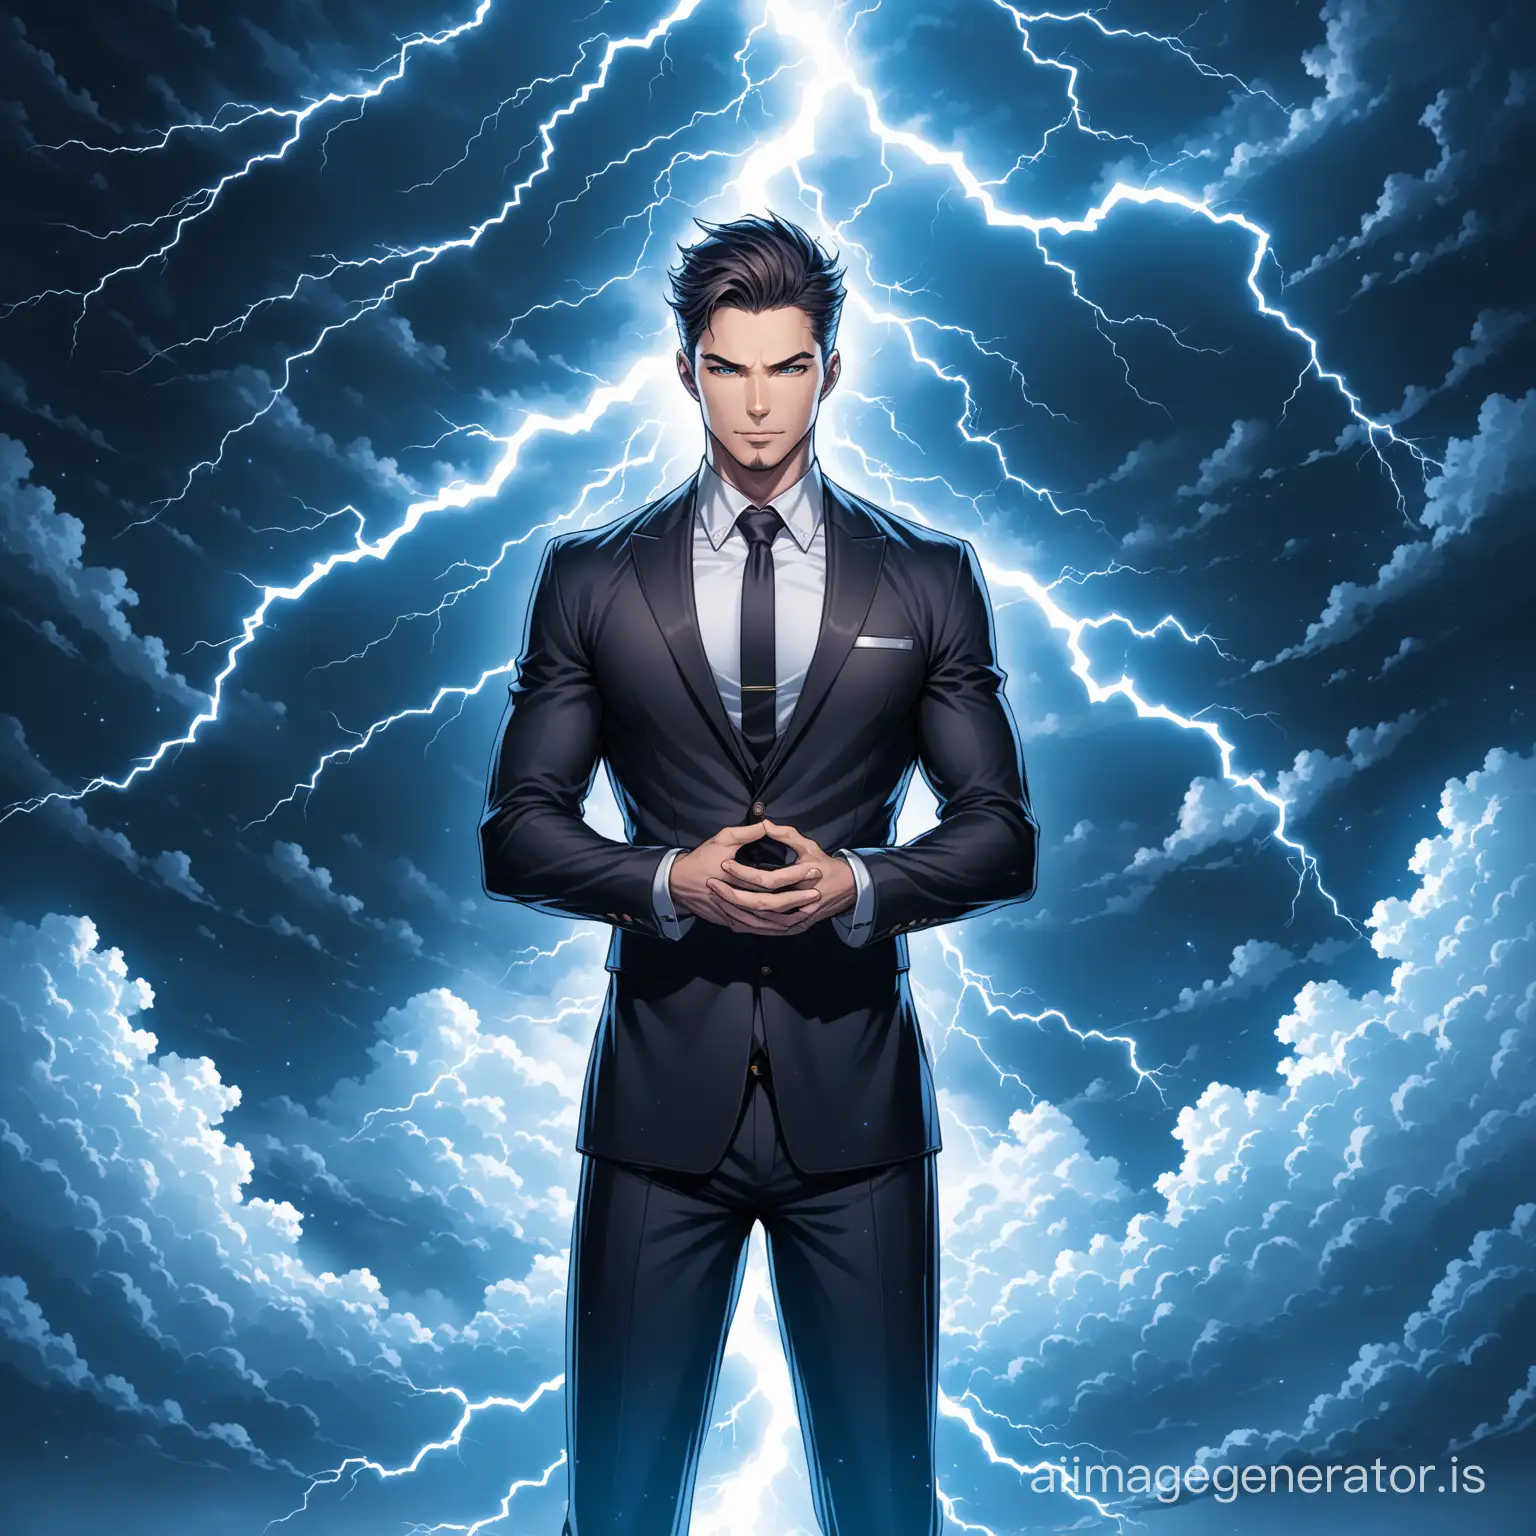 Generate an ultra high resolution image of a handsome male manipulator with clouds and lightning  in the background 